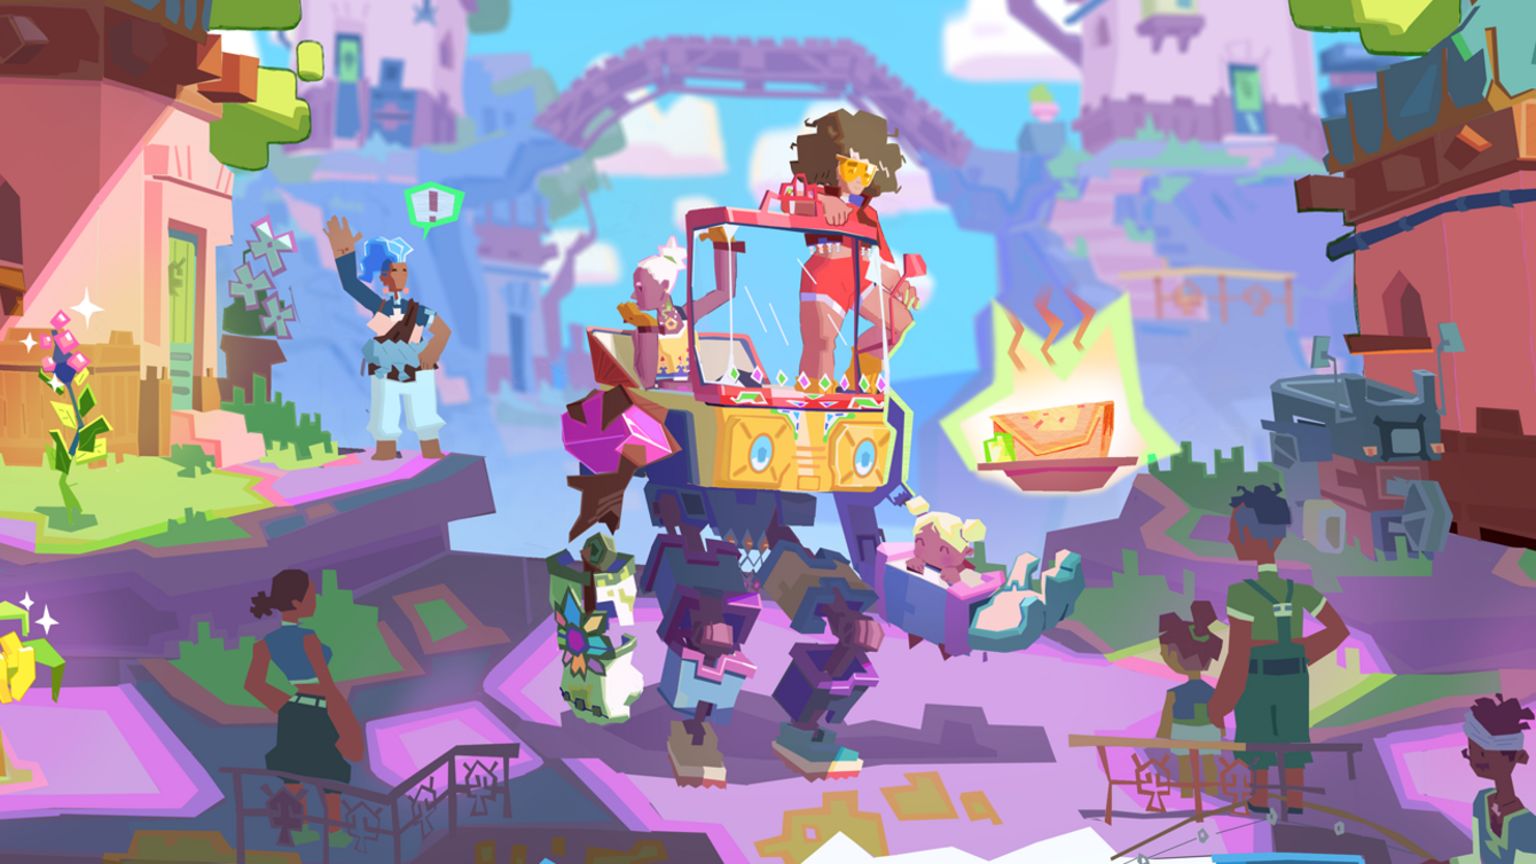 A colorful, cartoon town with purple streets and brightly coloured buildings populated by simply drawn characters. In the centre a female character stands atop a giant, bipedal robot piloted by a second female character.